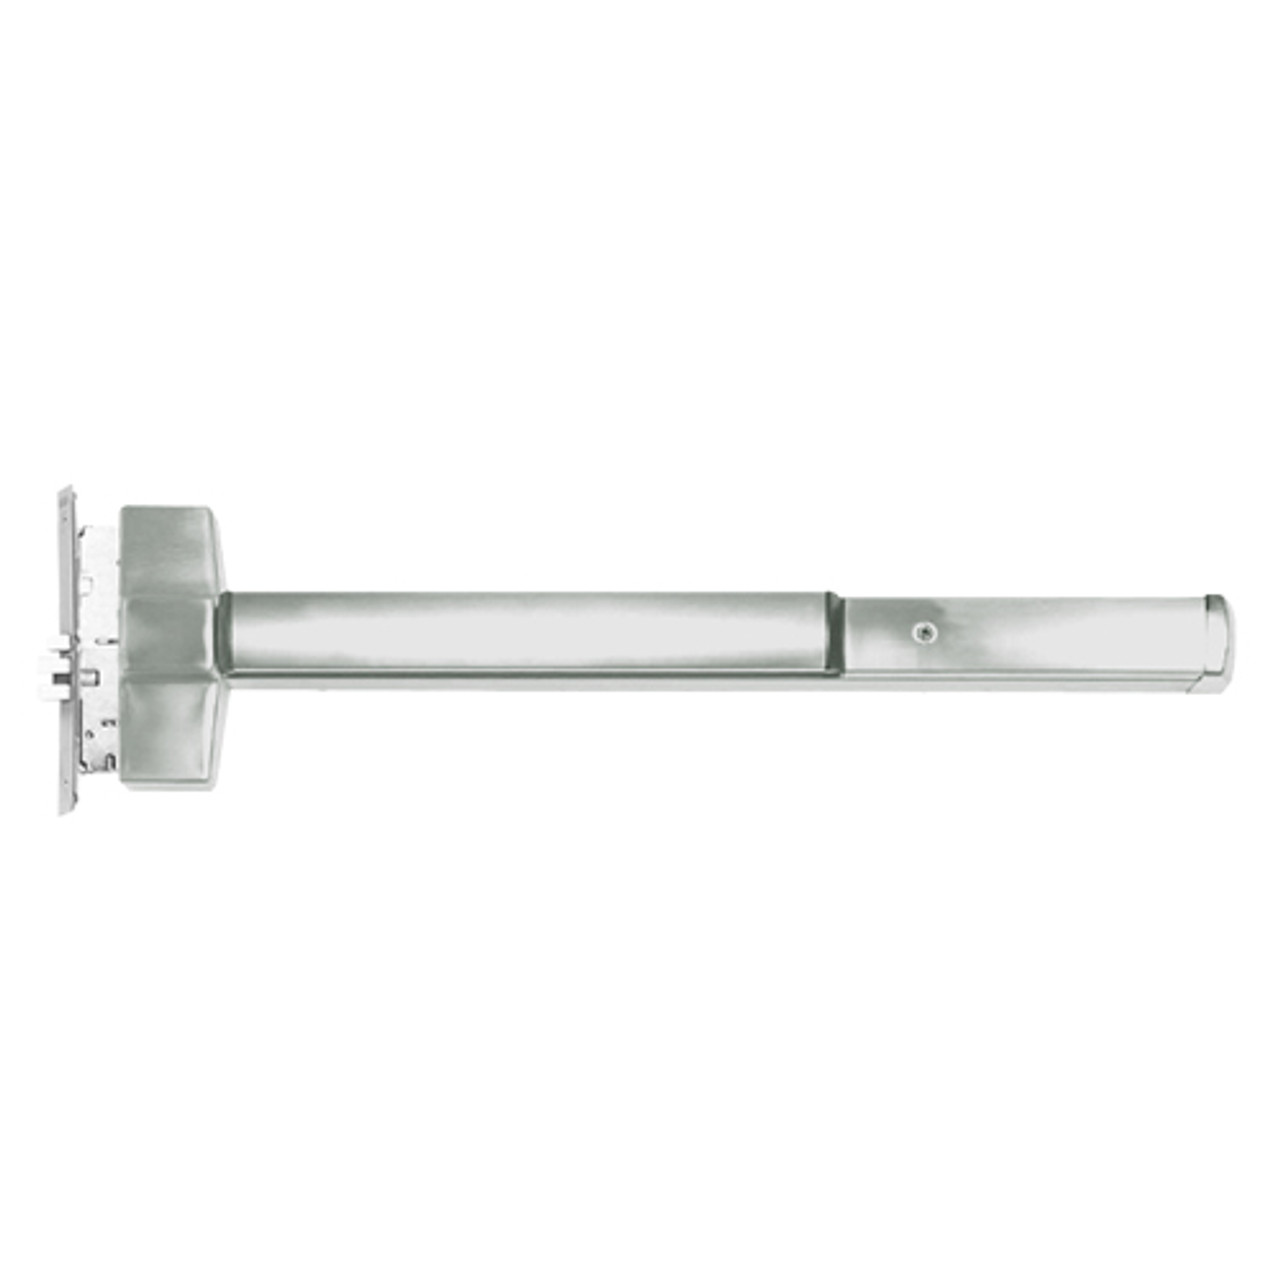 ED5657L-619-W048-LHR Corbin ED5600 Series Non Fire Rated Mortise Exit Device in Satin Nickel Finish